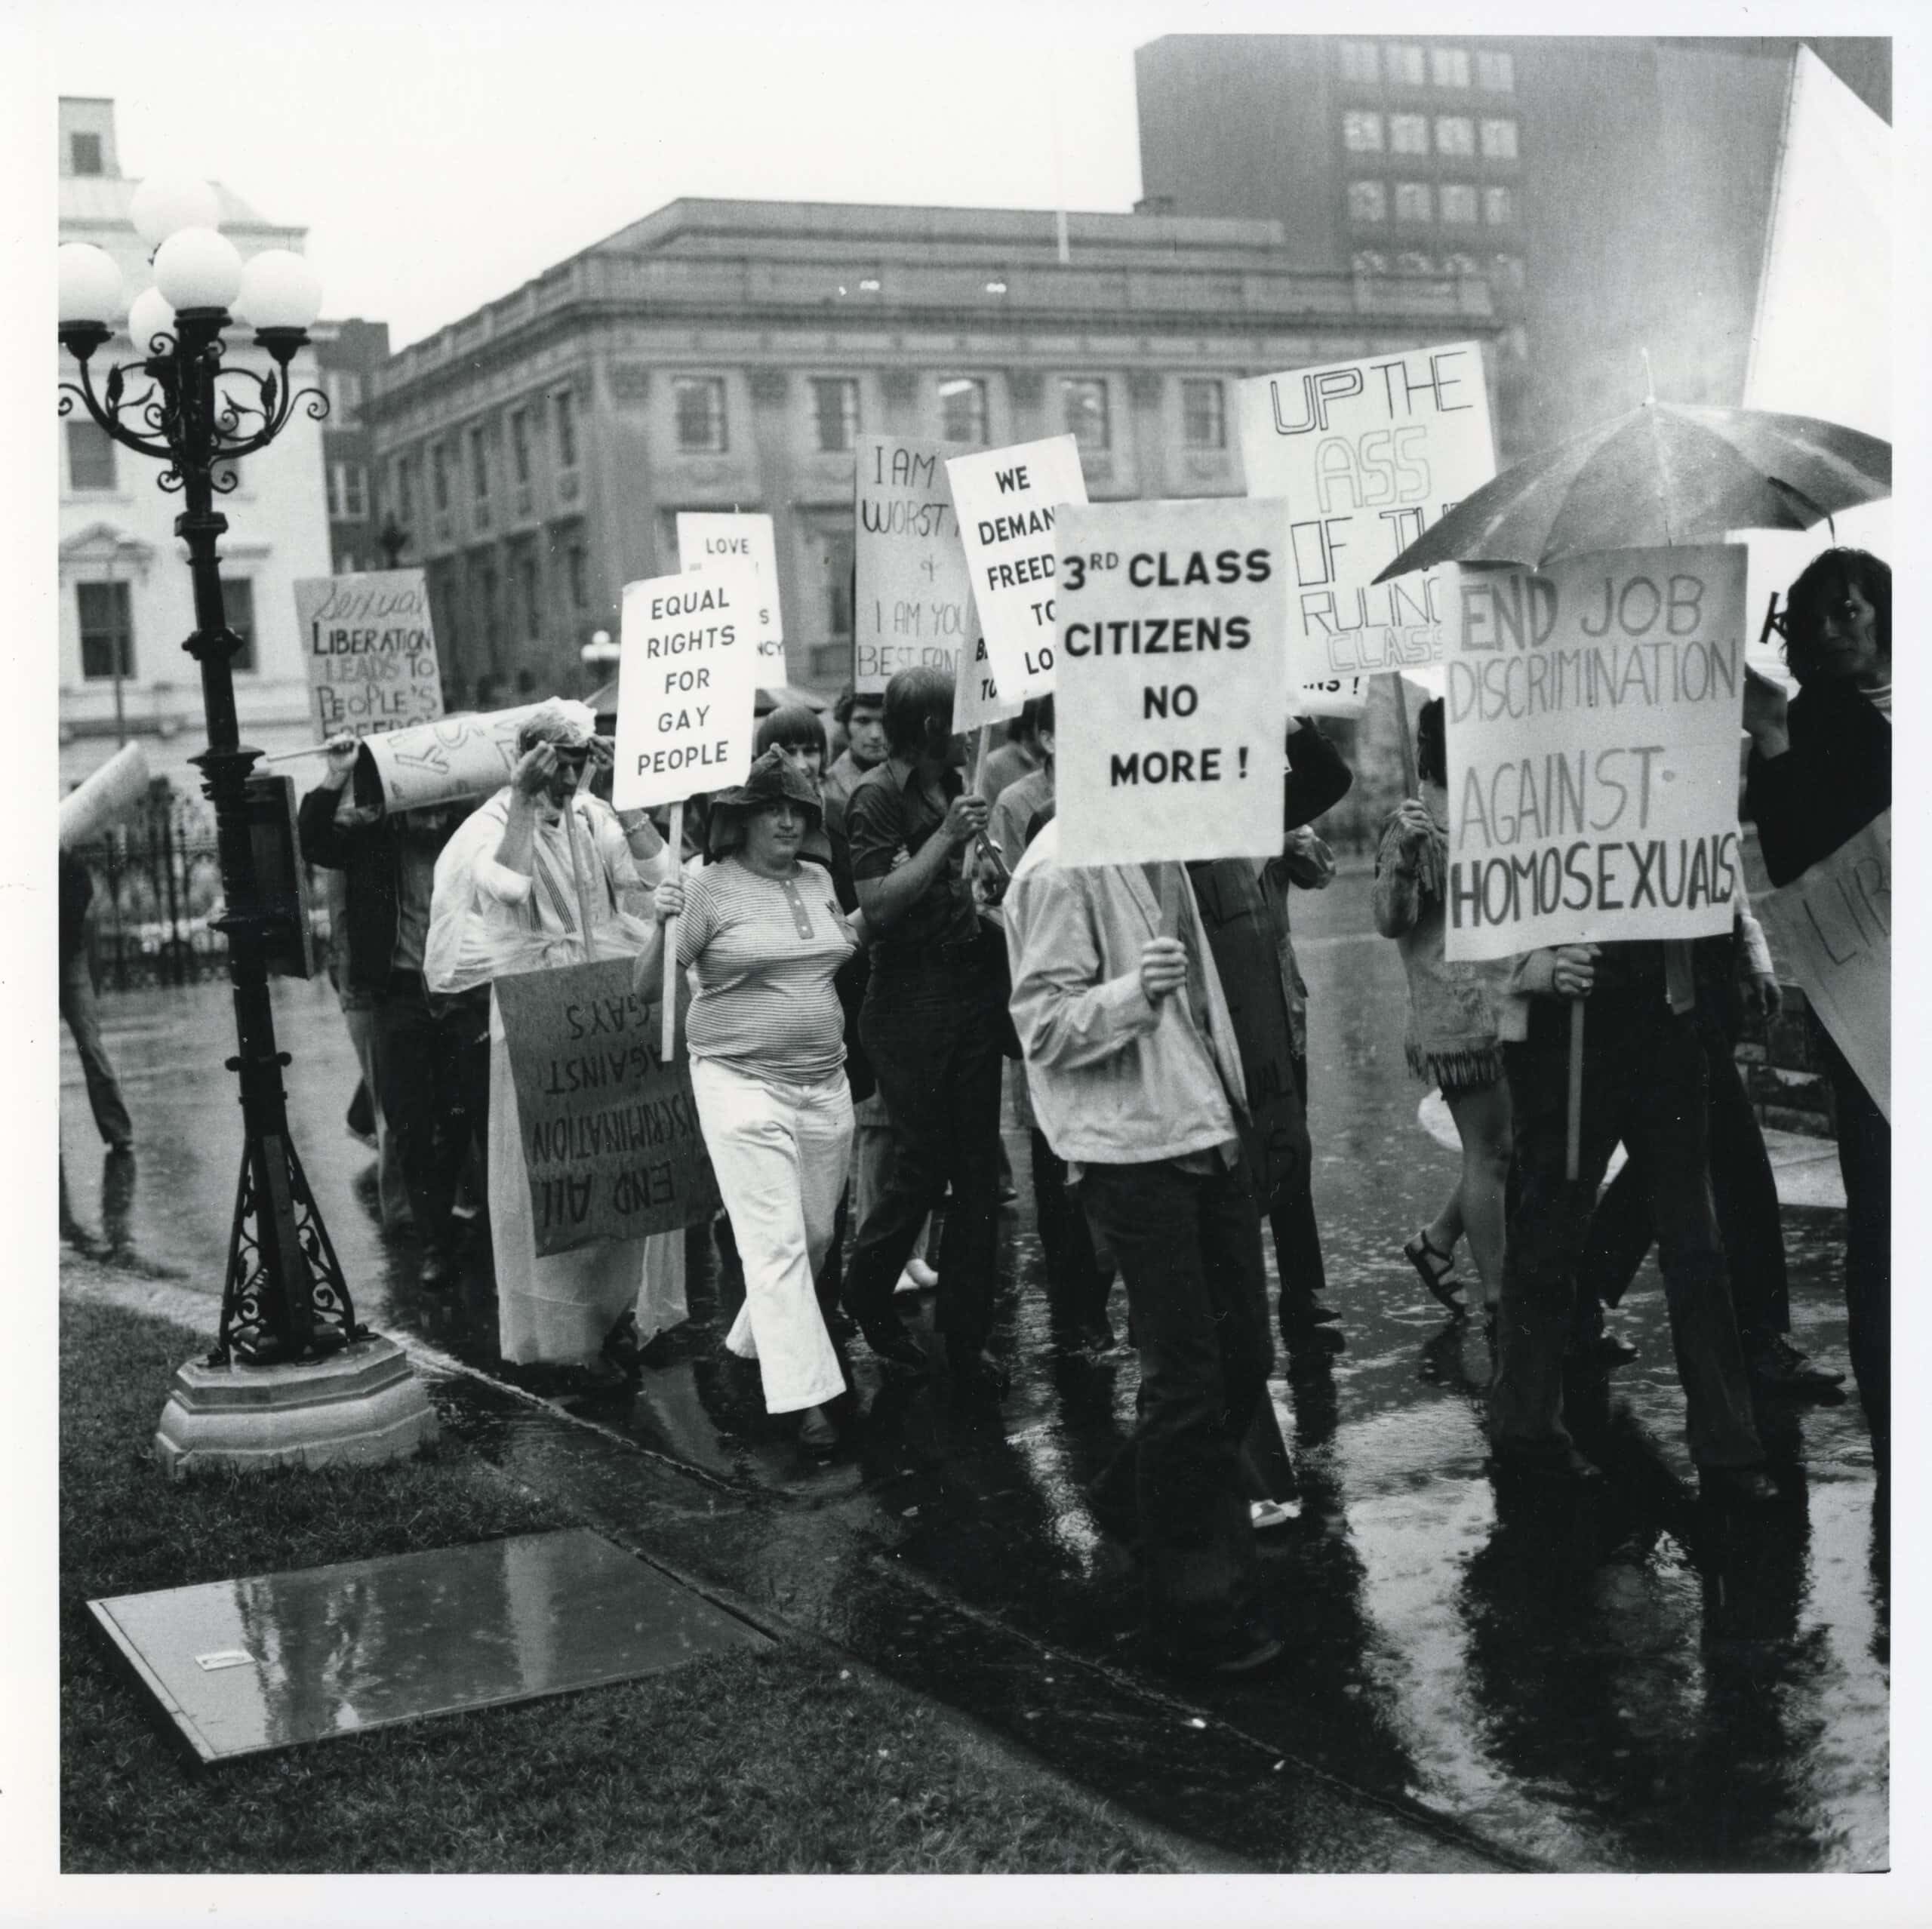 Demonstrators hold signs with text including: “3rd class citizens no more!” and “End job discrimination against homosexuals.”